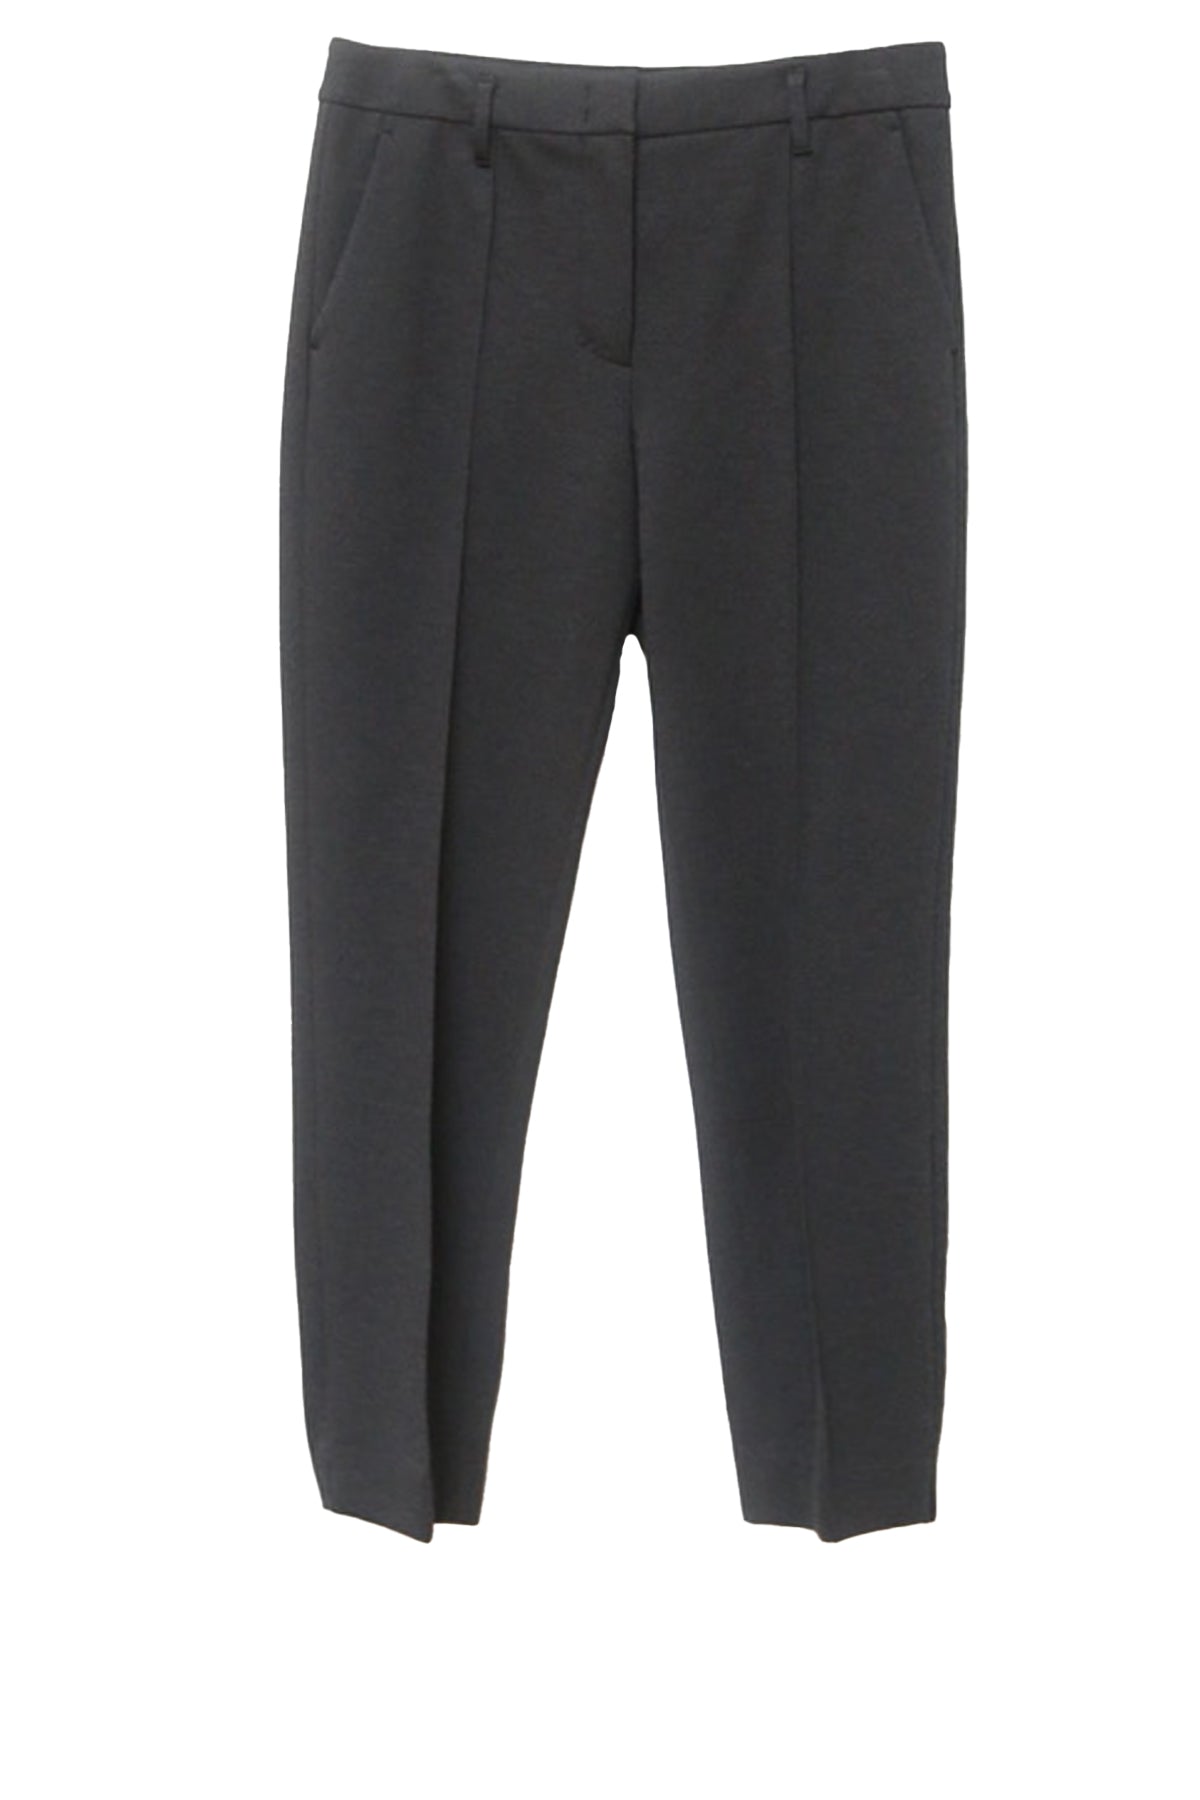 emotional essence cropped pants - charcoal